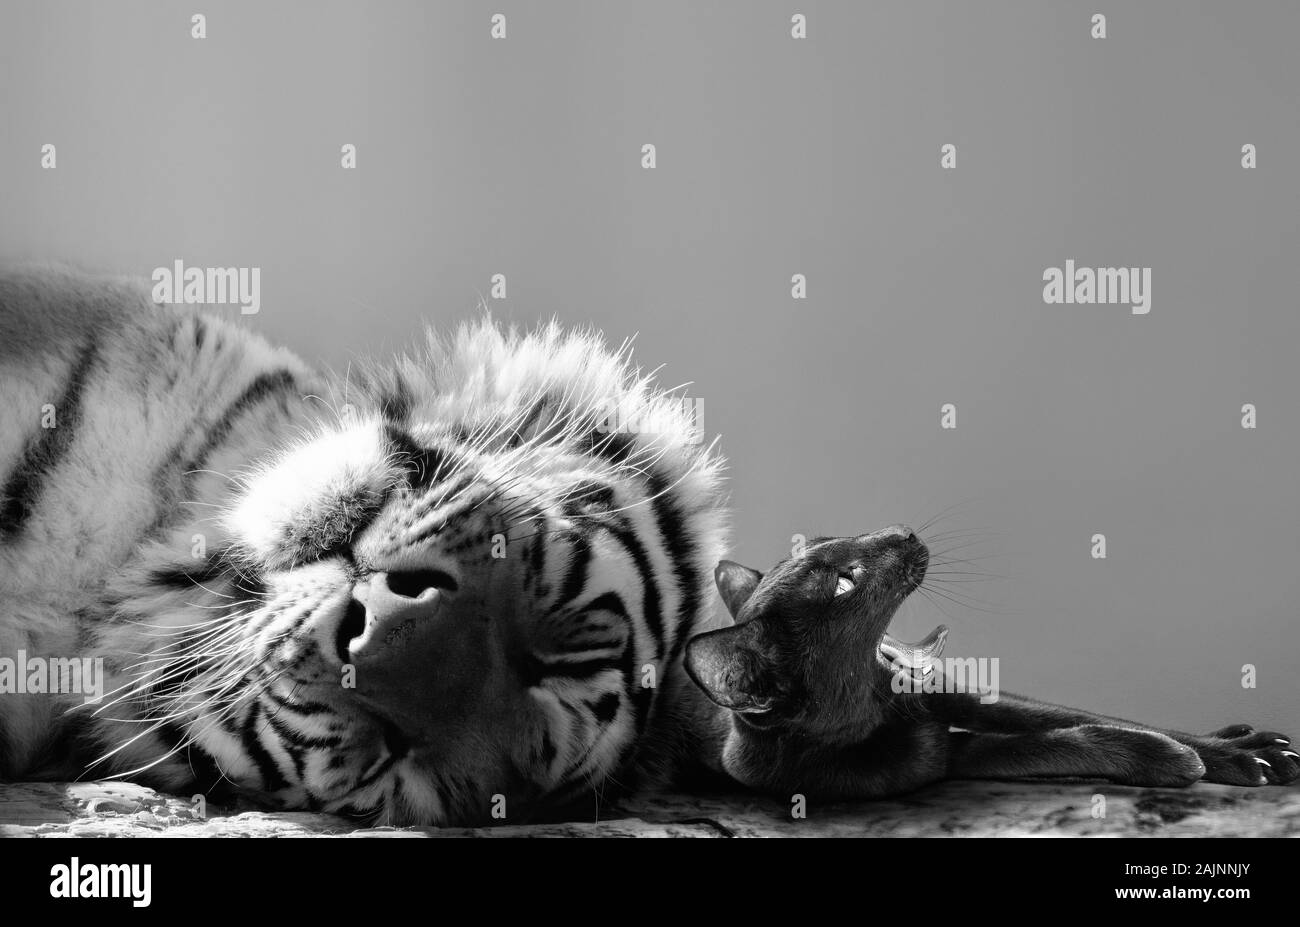 Black and white of a powerful tiger and small cat friend enjoying a catnap together Stock Photo